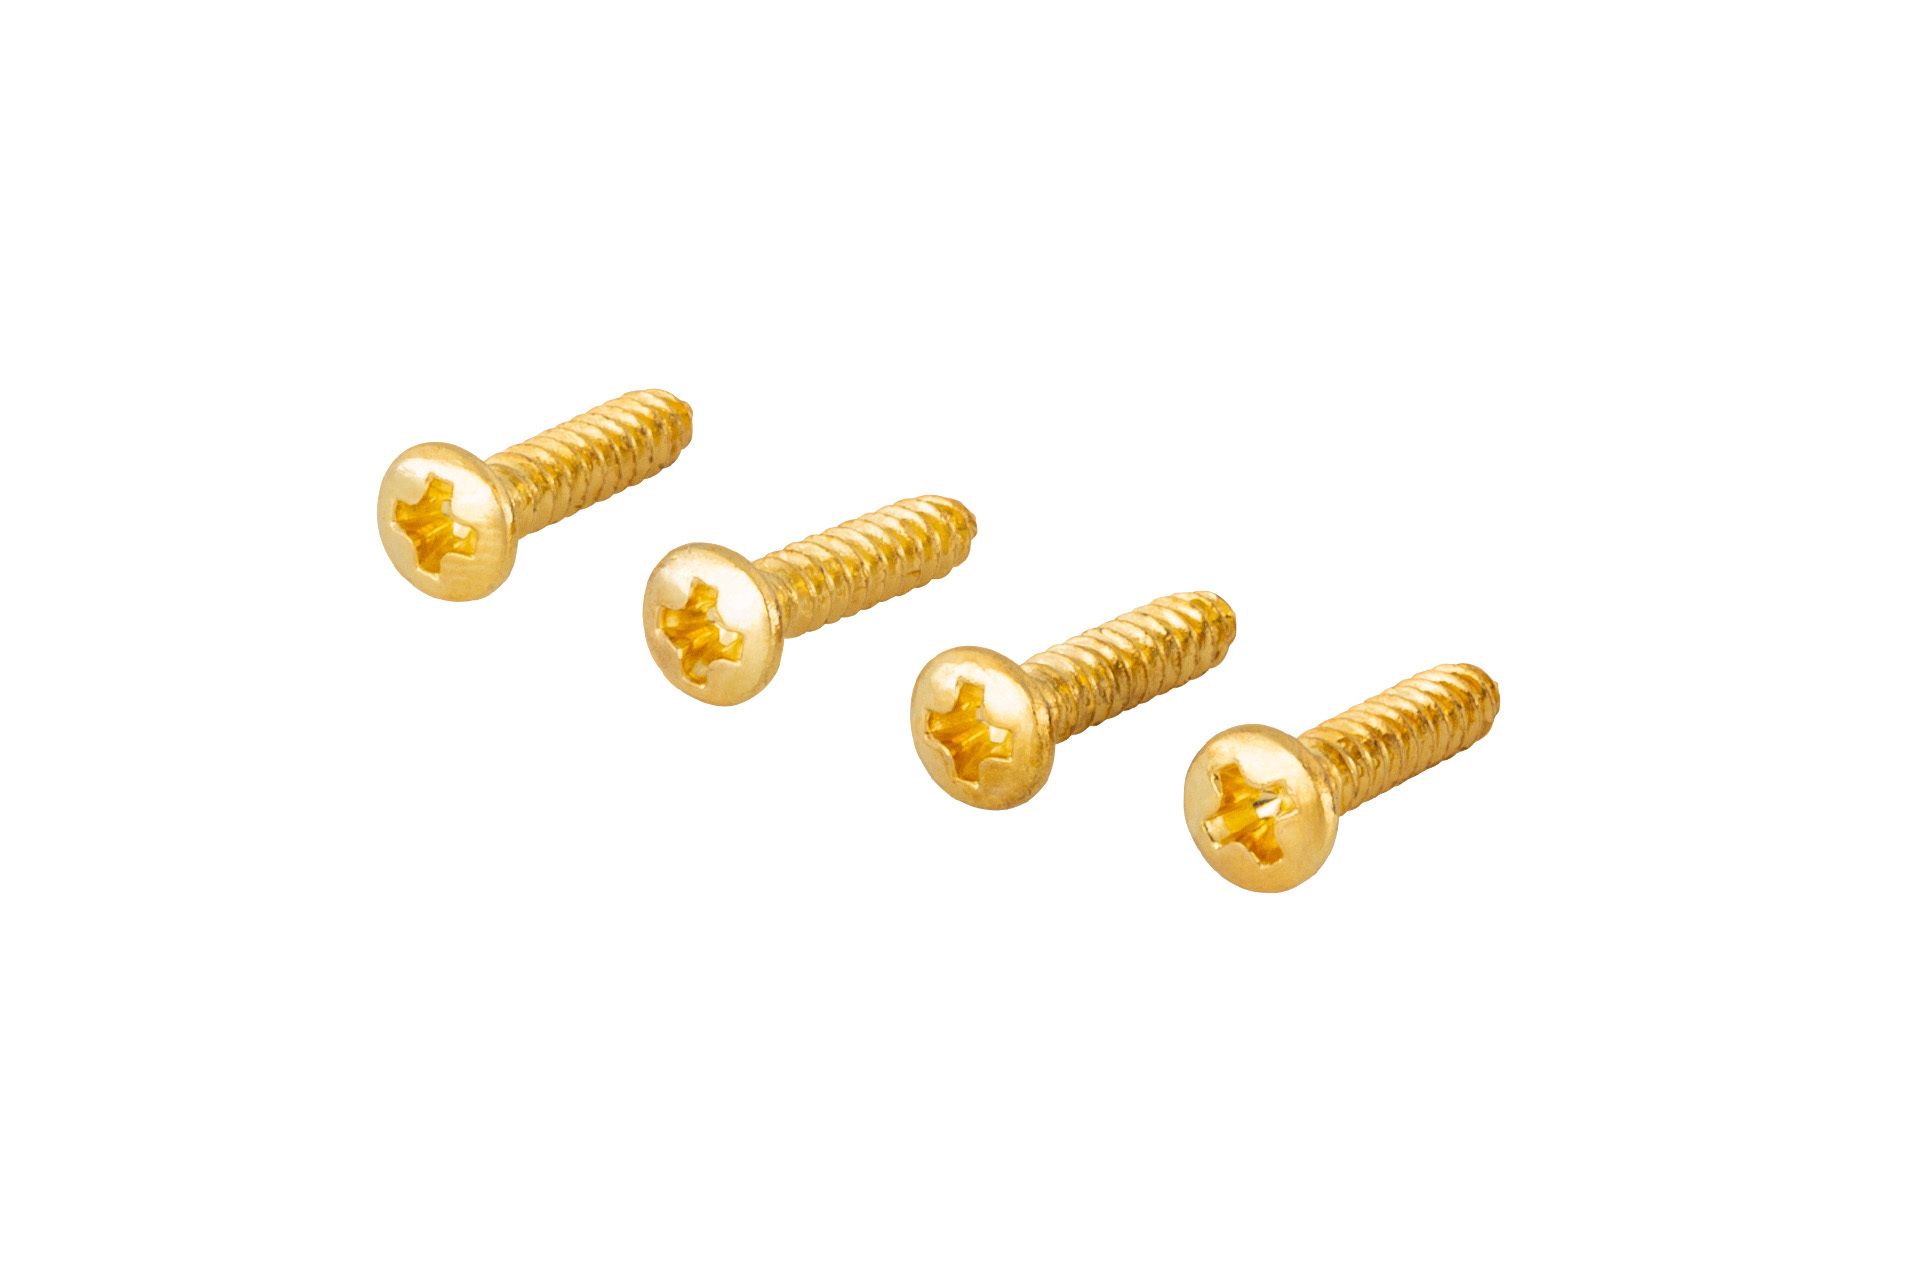 Framus & Warwick Parts - Countersunk Screw for String Retainer, 2,2 mm x 13 mm, 4 pcs. - Gold